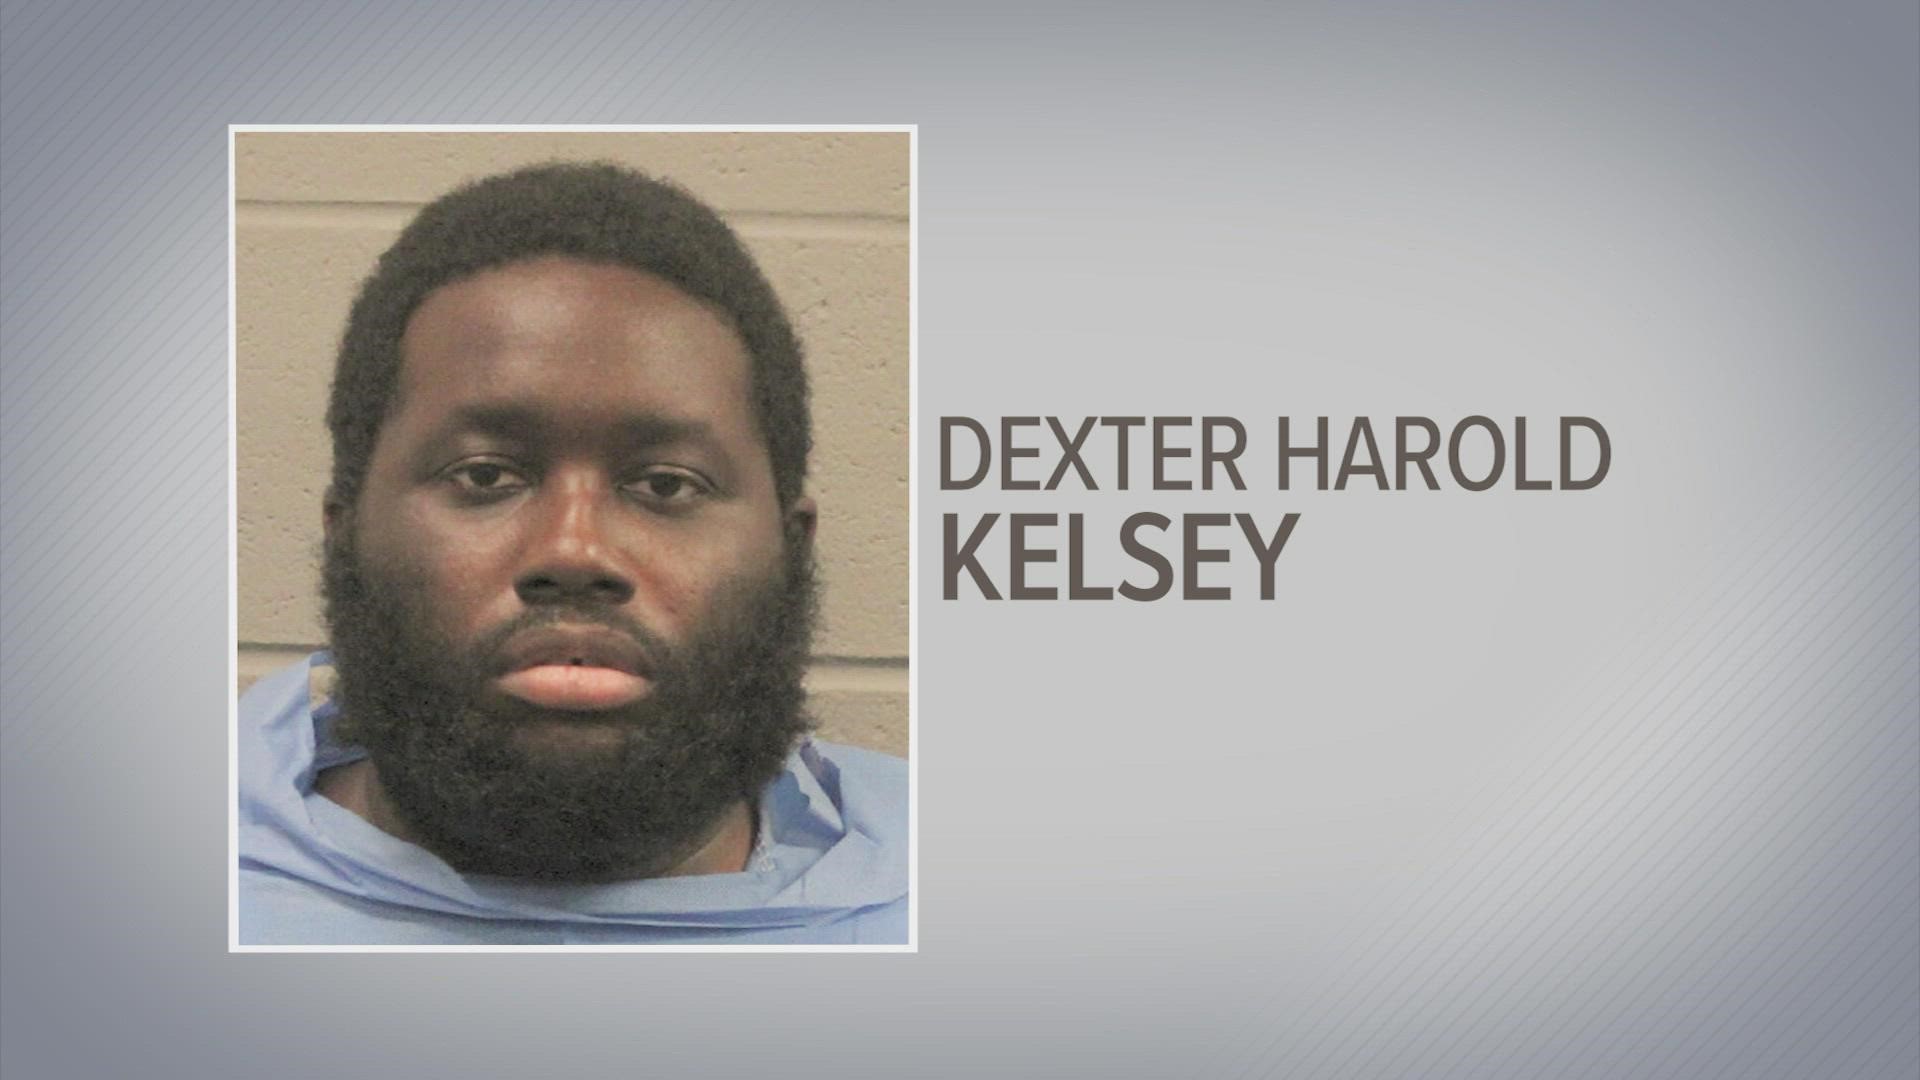 According to a law enforcement source, 25-year-old Dexter Kelsey confessed and said he was hearing voices.